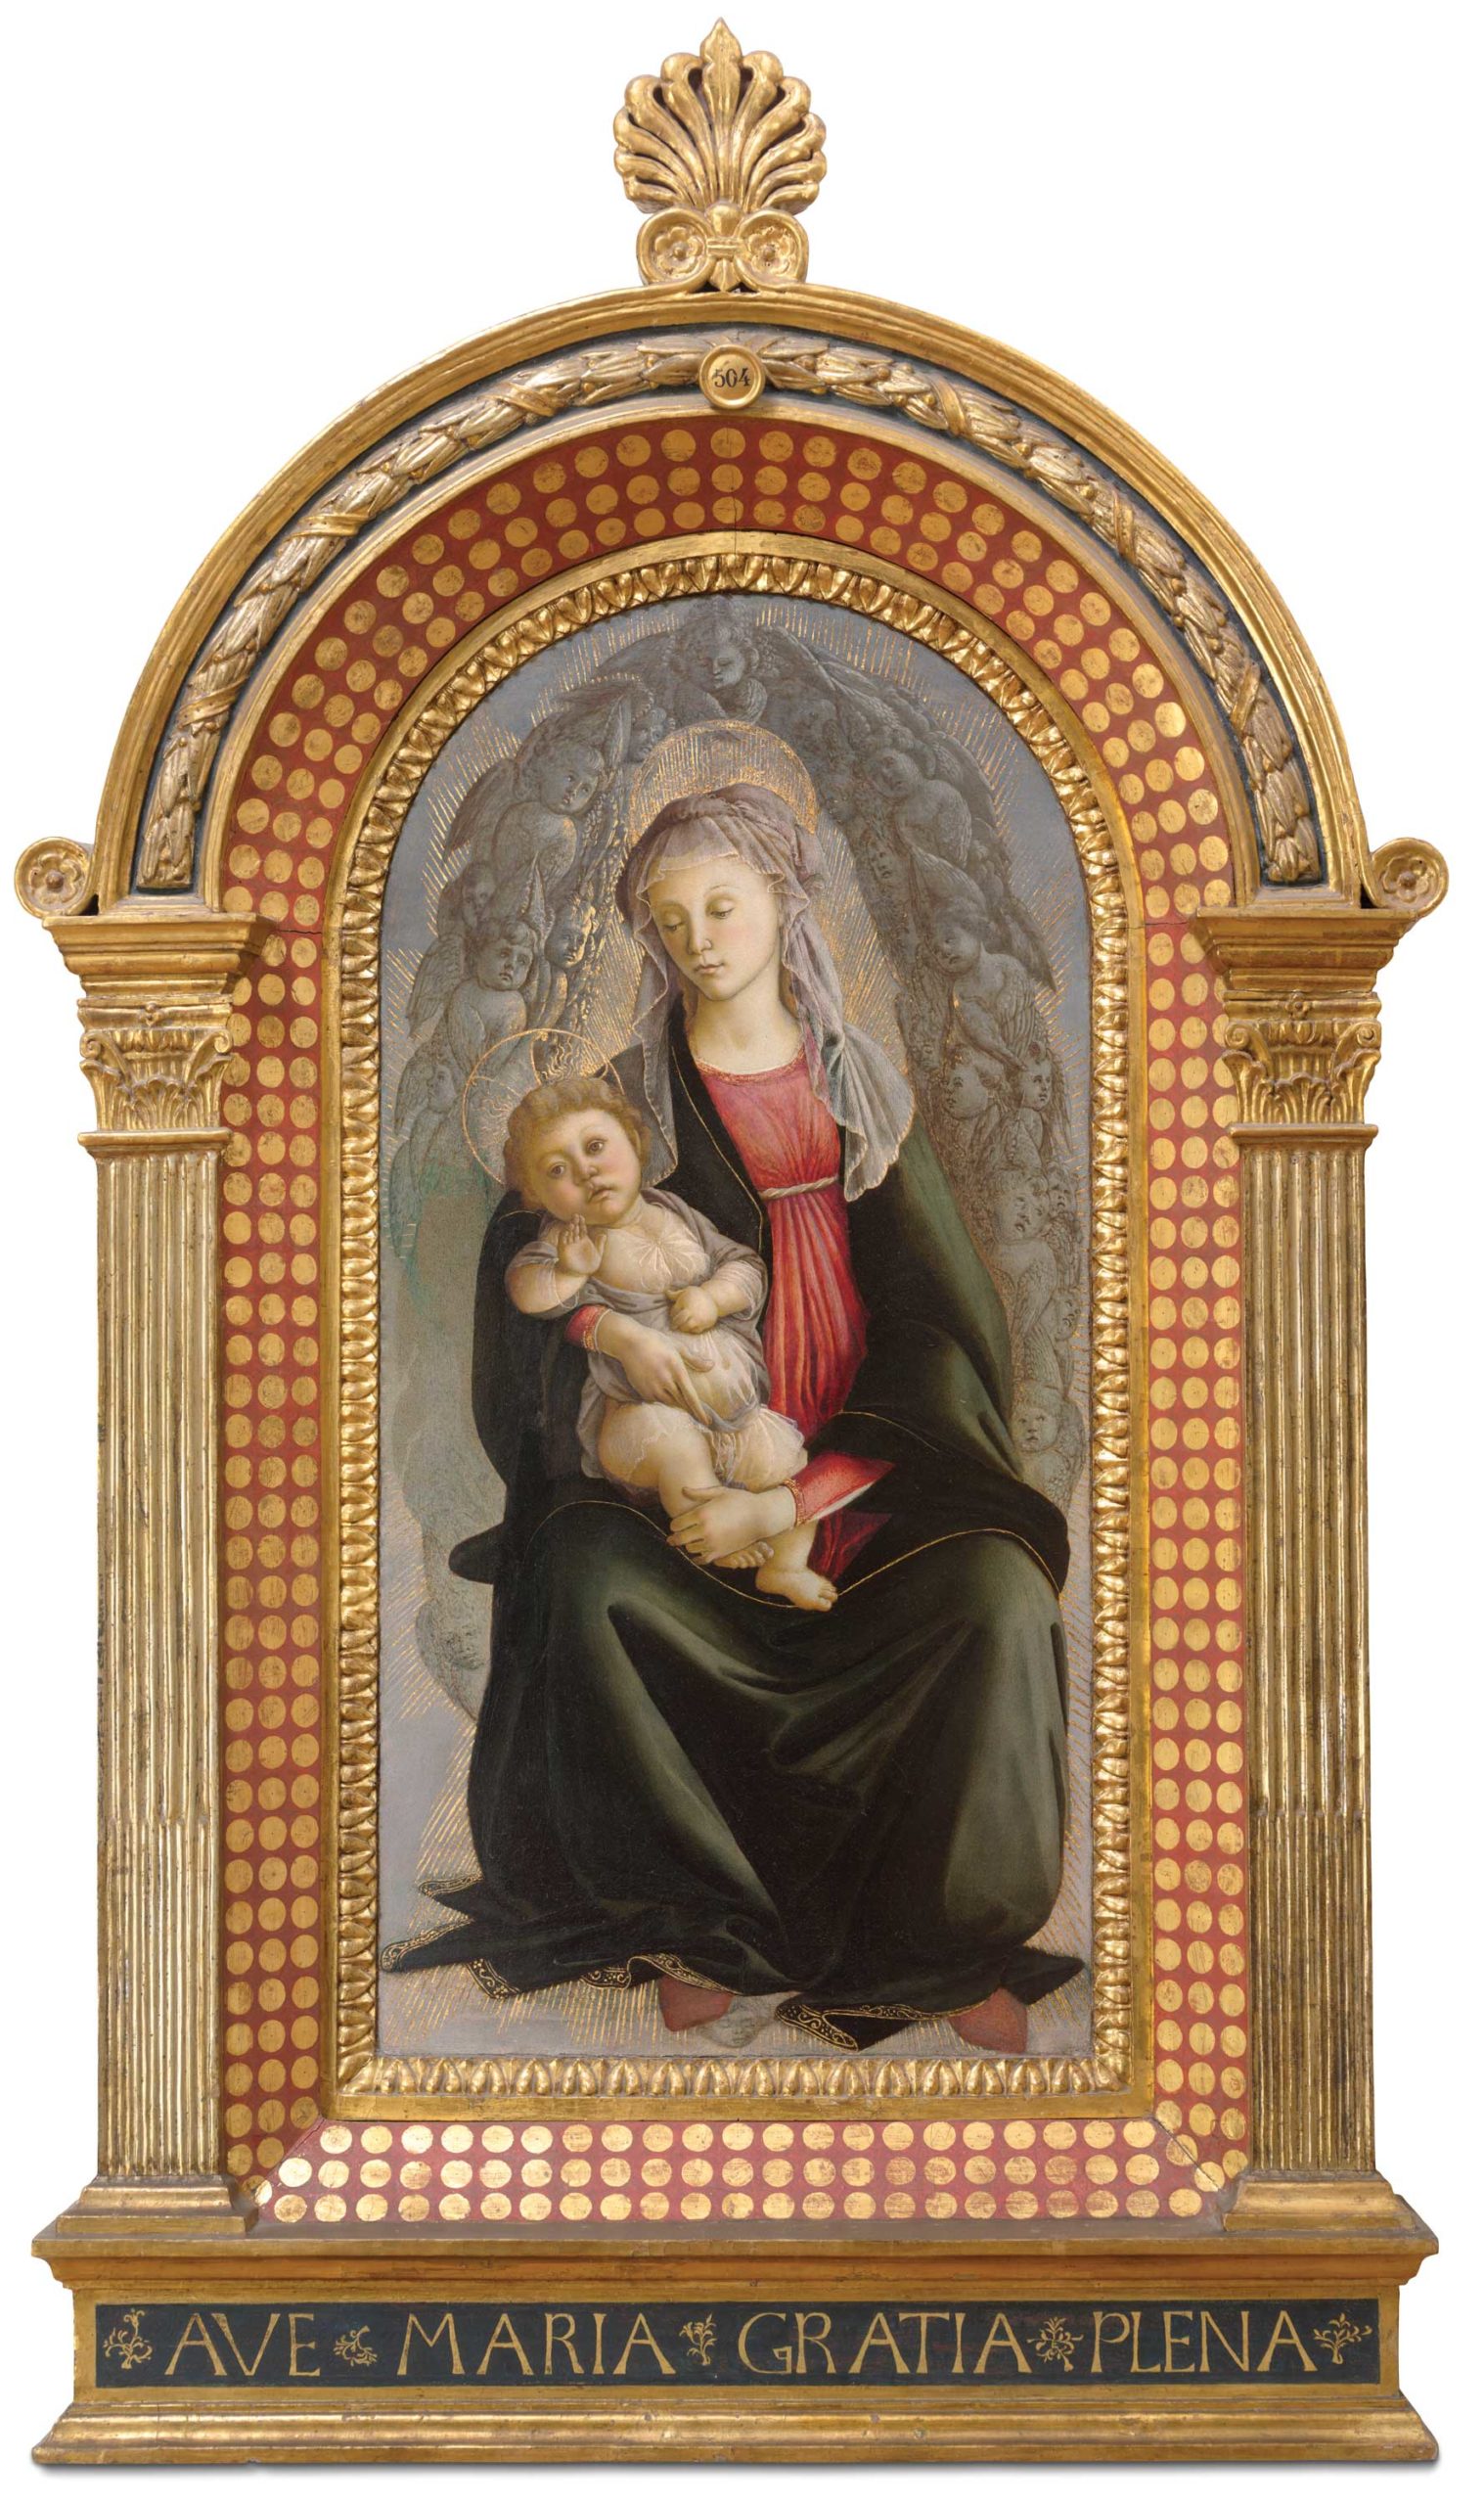 Sandro Botticelli (1445–1510), "Madonna and Child in Glory with Angels," c. 1467–69, tempera on panel, 47 1/4 x 25 1/4 in., Gallerie degli Uffizi, Florence